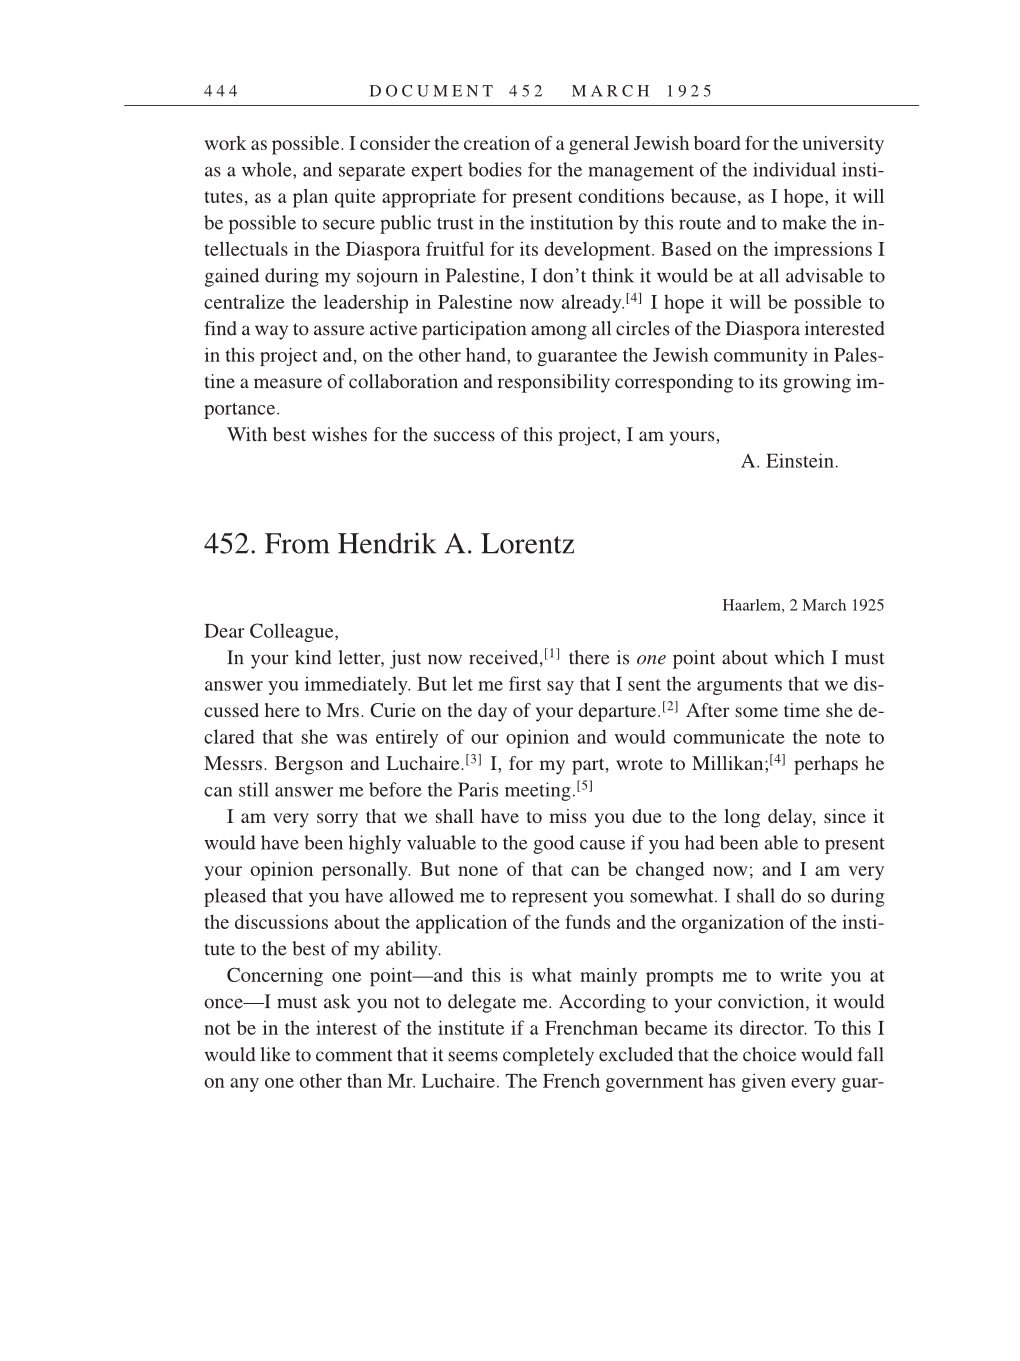 Volume 14: The Berlin Years: Writings & Correspondence, April 1923-May 1925 (English Translation Supplement) page 444